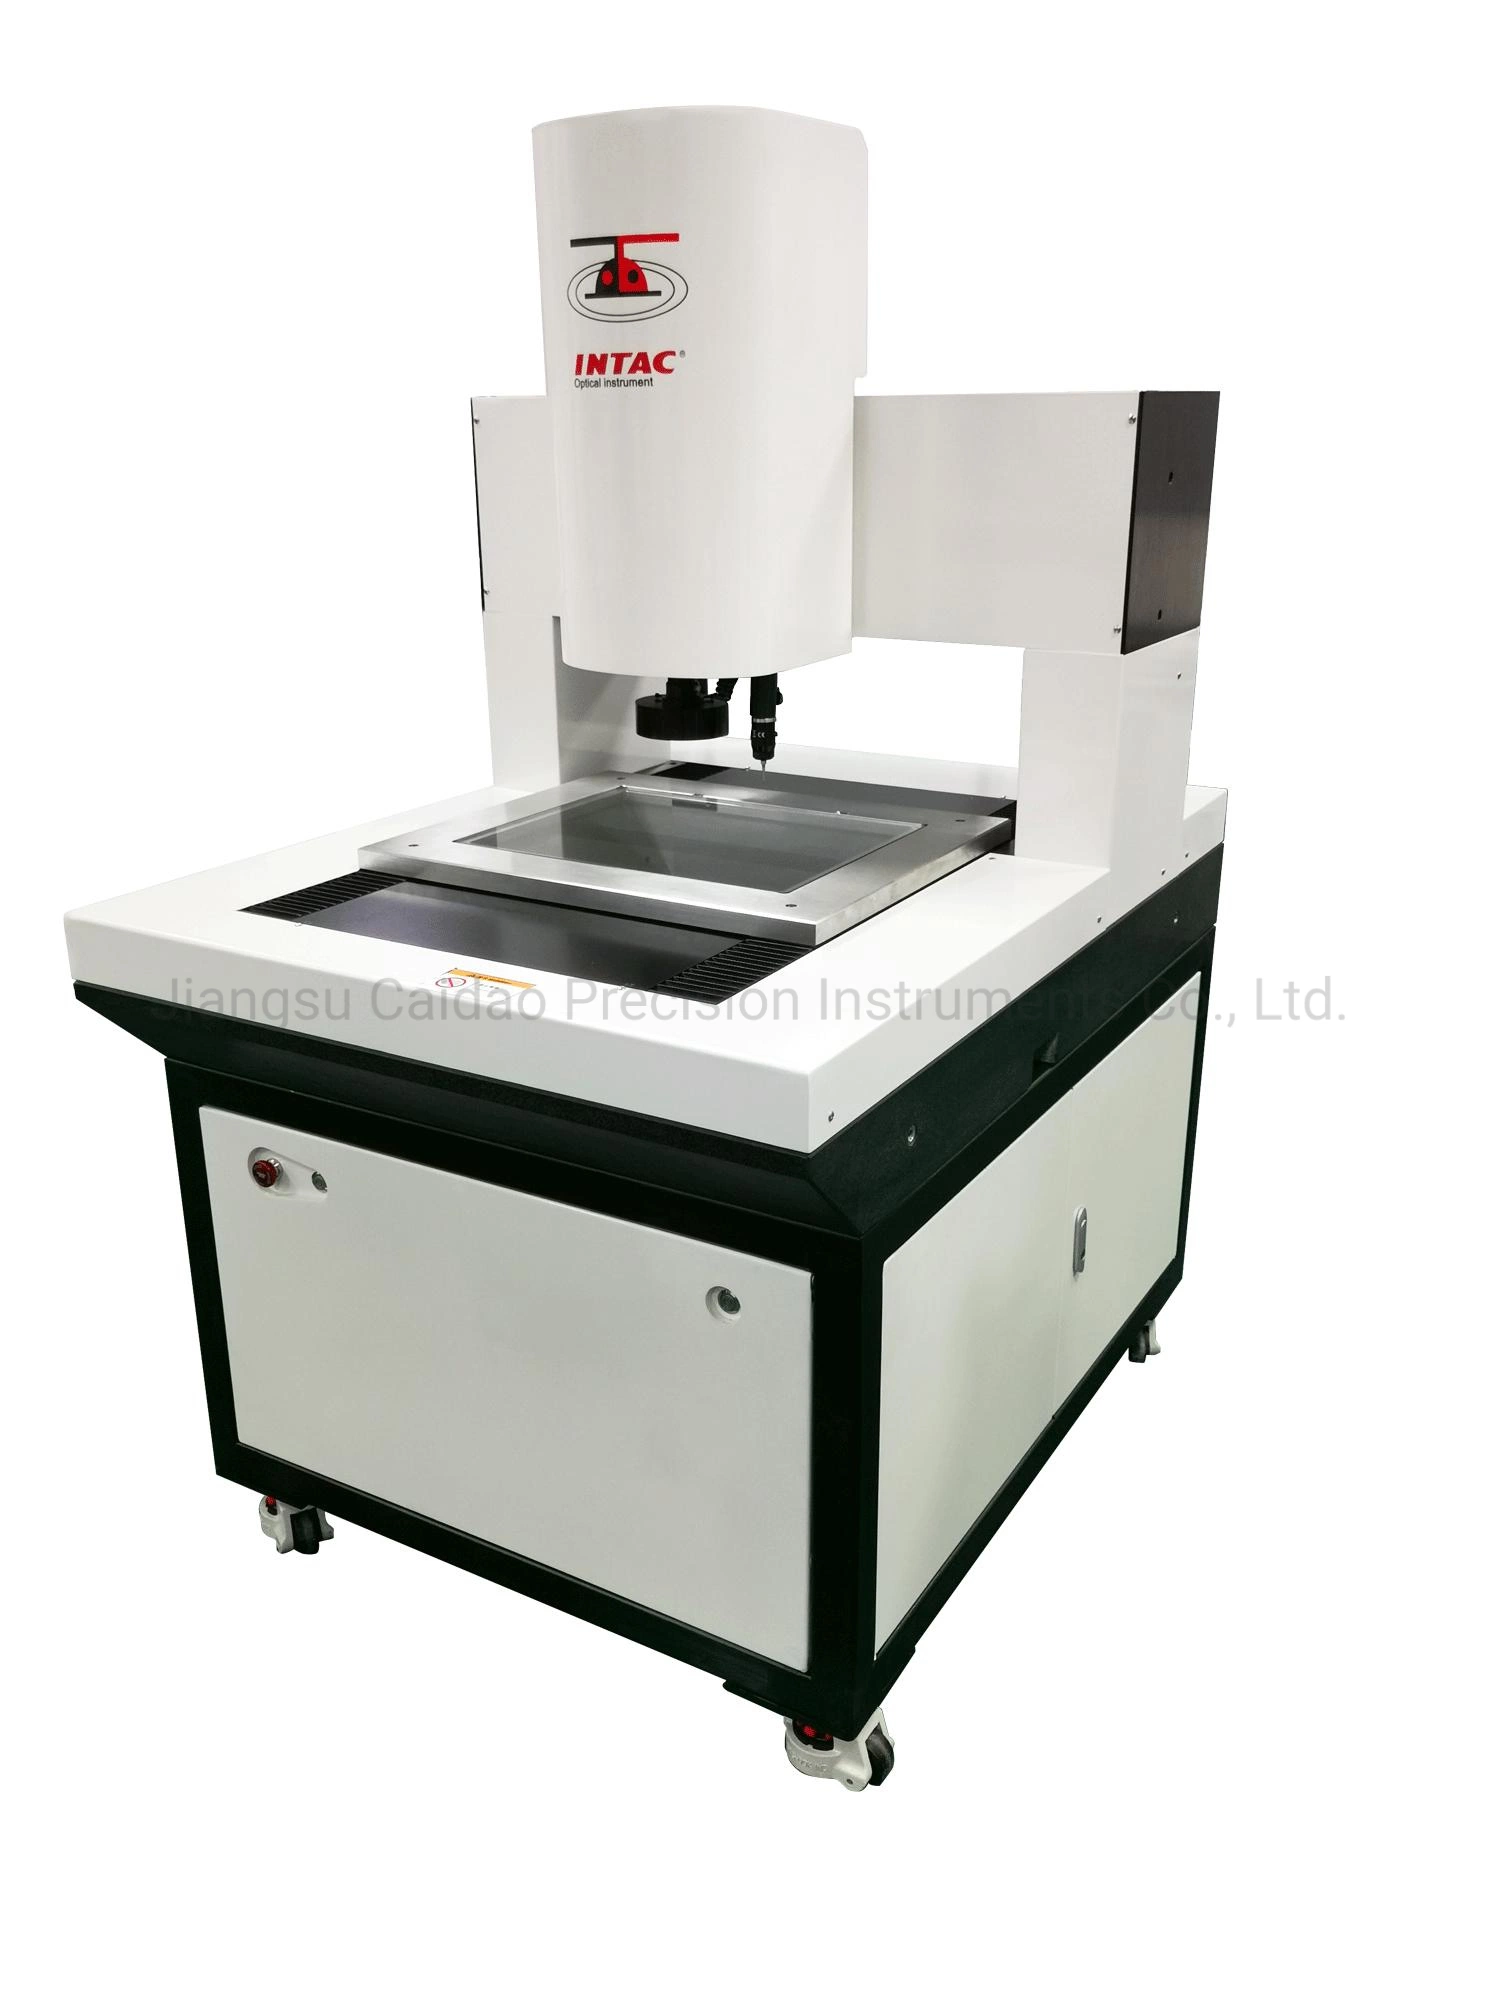 Precision Measuring Equipment for 3D Inspection Newton 600h